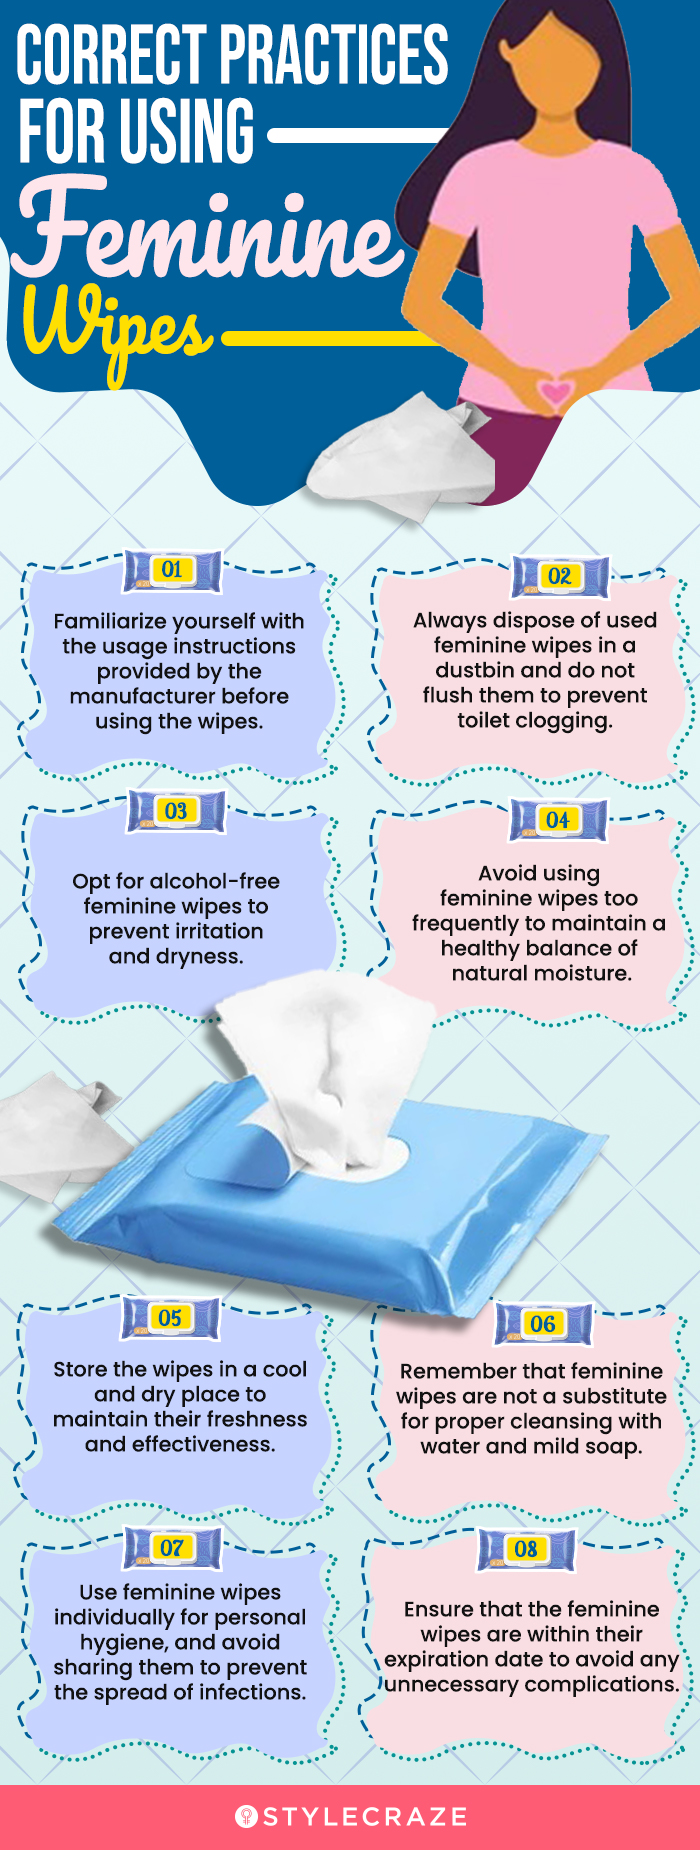 Correct Practices For Using Feminine Wipes(infographic)